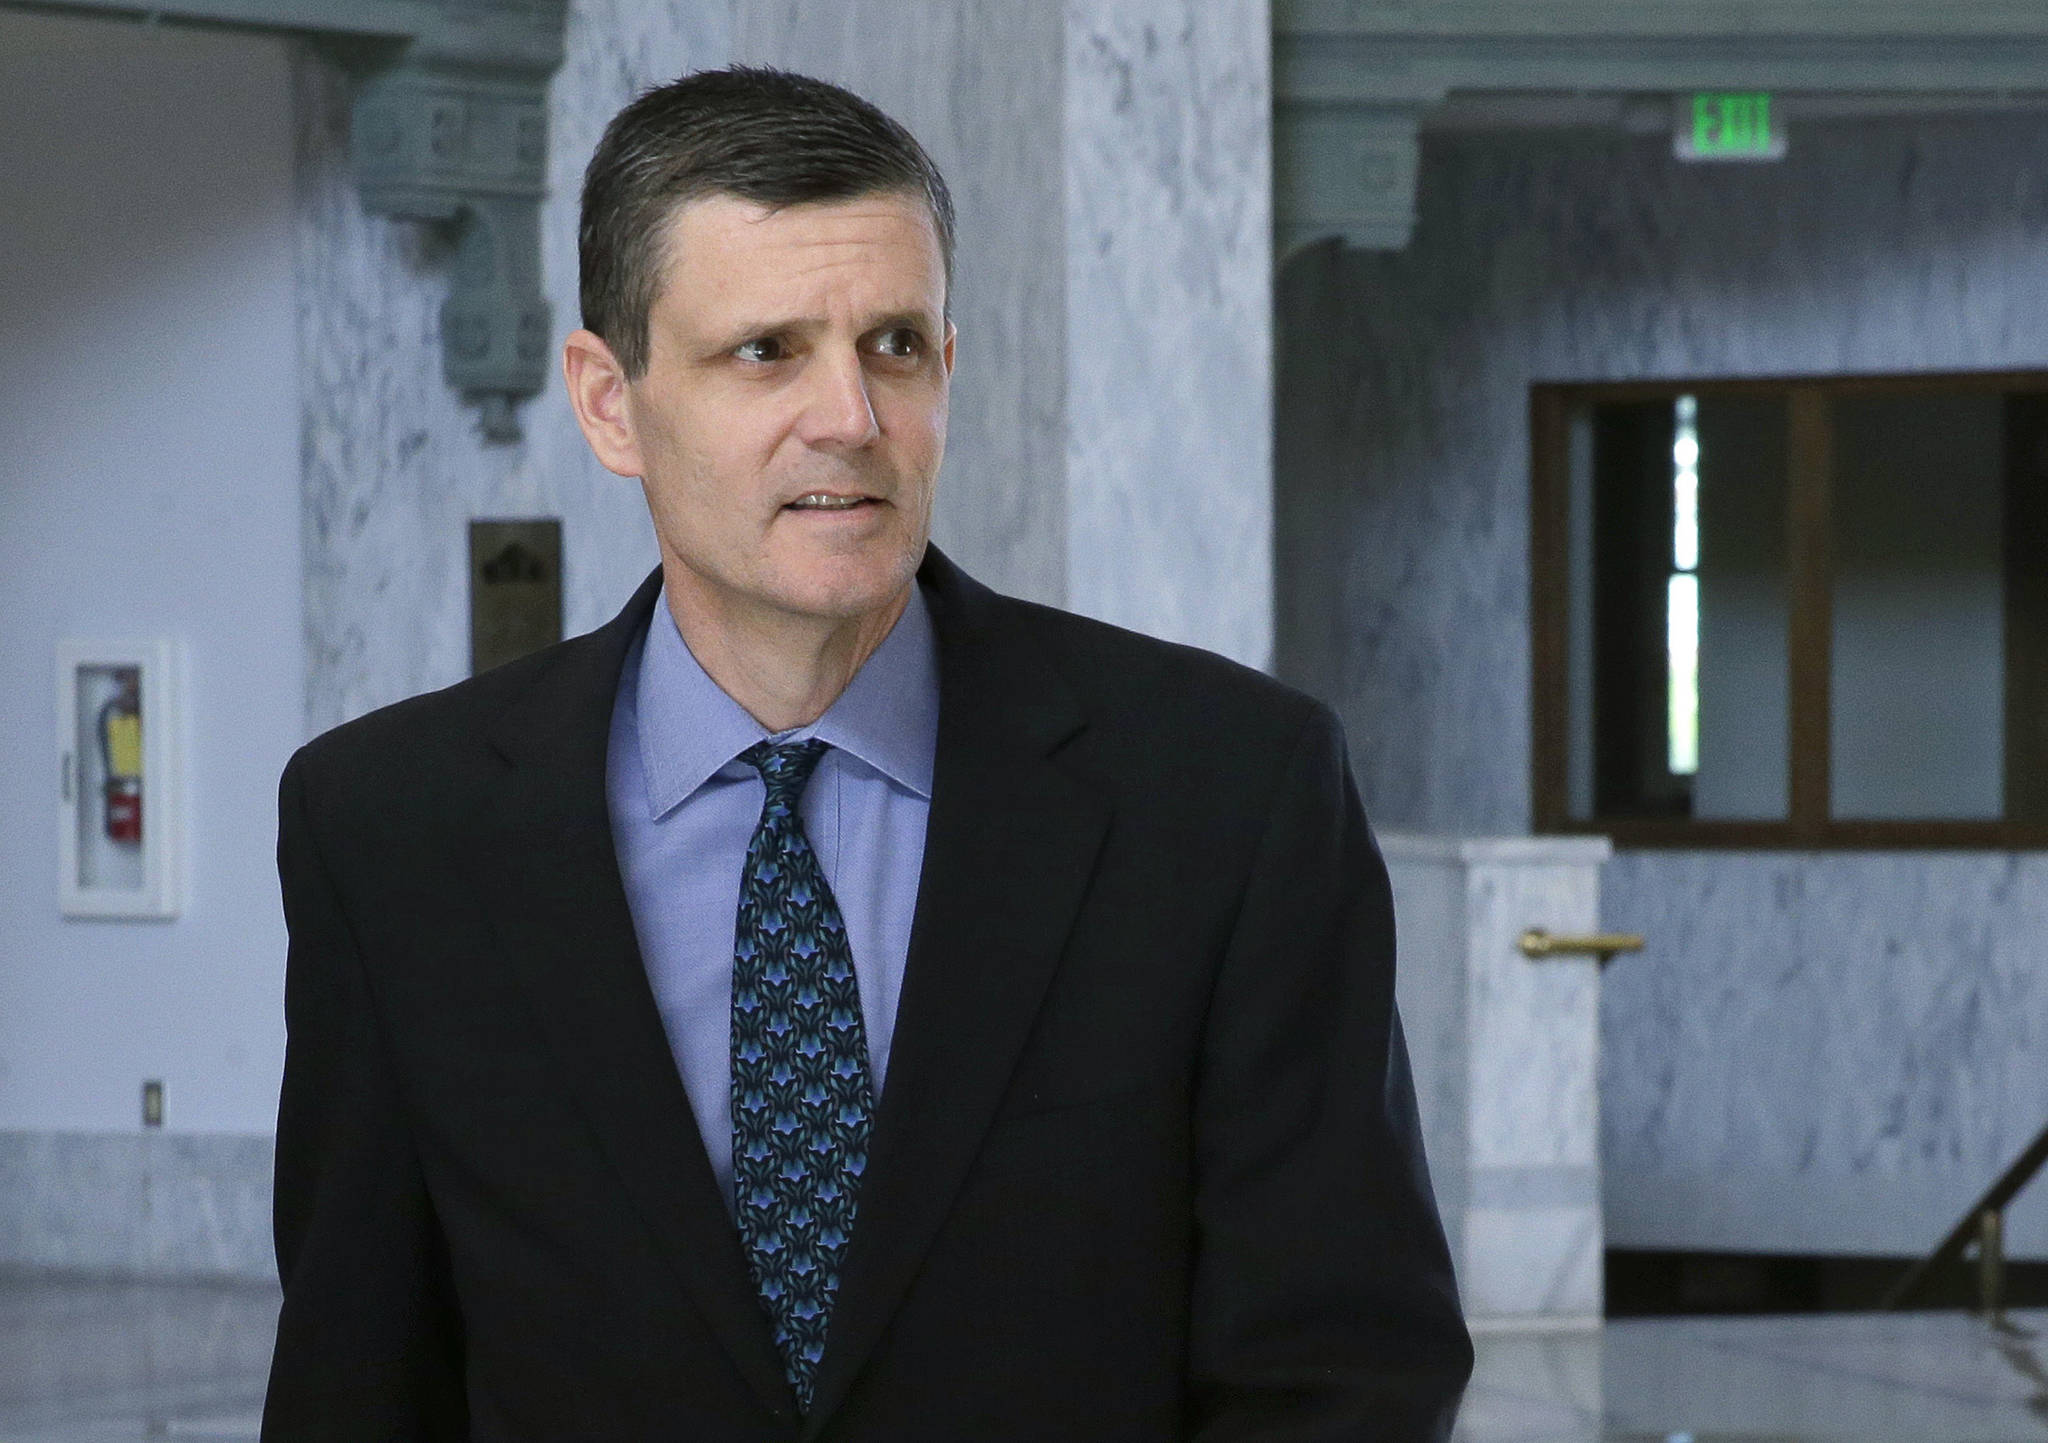 Washington State Auditor Troy Kelley leaves the federal courthouse in Tacoma on April 26, 2016. Kelley, whose federal fraud trial last year ended with an acquittal on one count and a deadlocked jury on more than a dozen others, will be in a courtroom once again this week as prosecutors try him a second time. And this time, newly recovered emails dating to 2003 could shed light on whether he was entitled to pocket the roughly $3 million the government says he stole when he ran a real-estate services business during the height of last decade’s housing boom. (Ted S. Warren/The Associated Press)